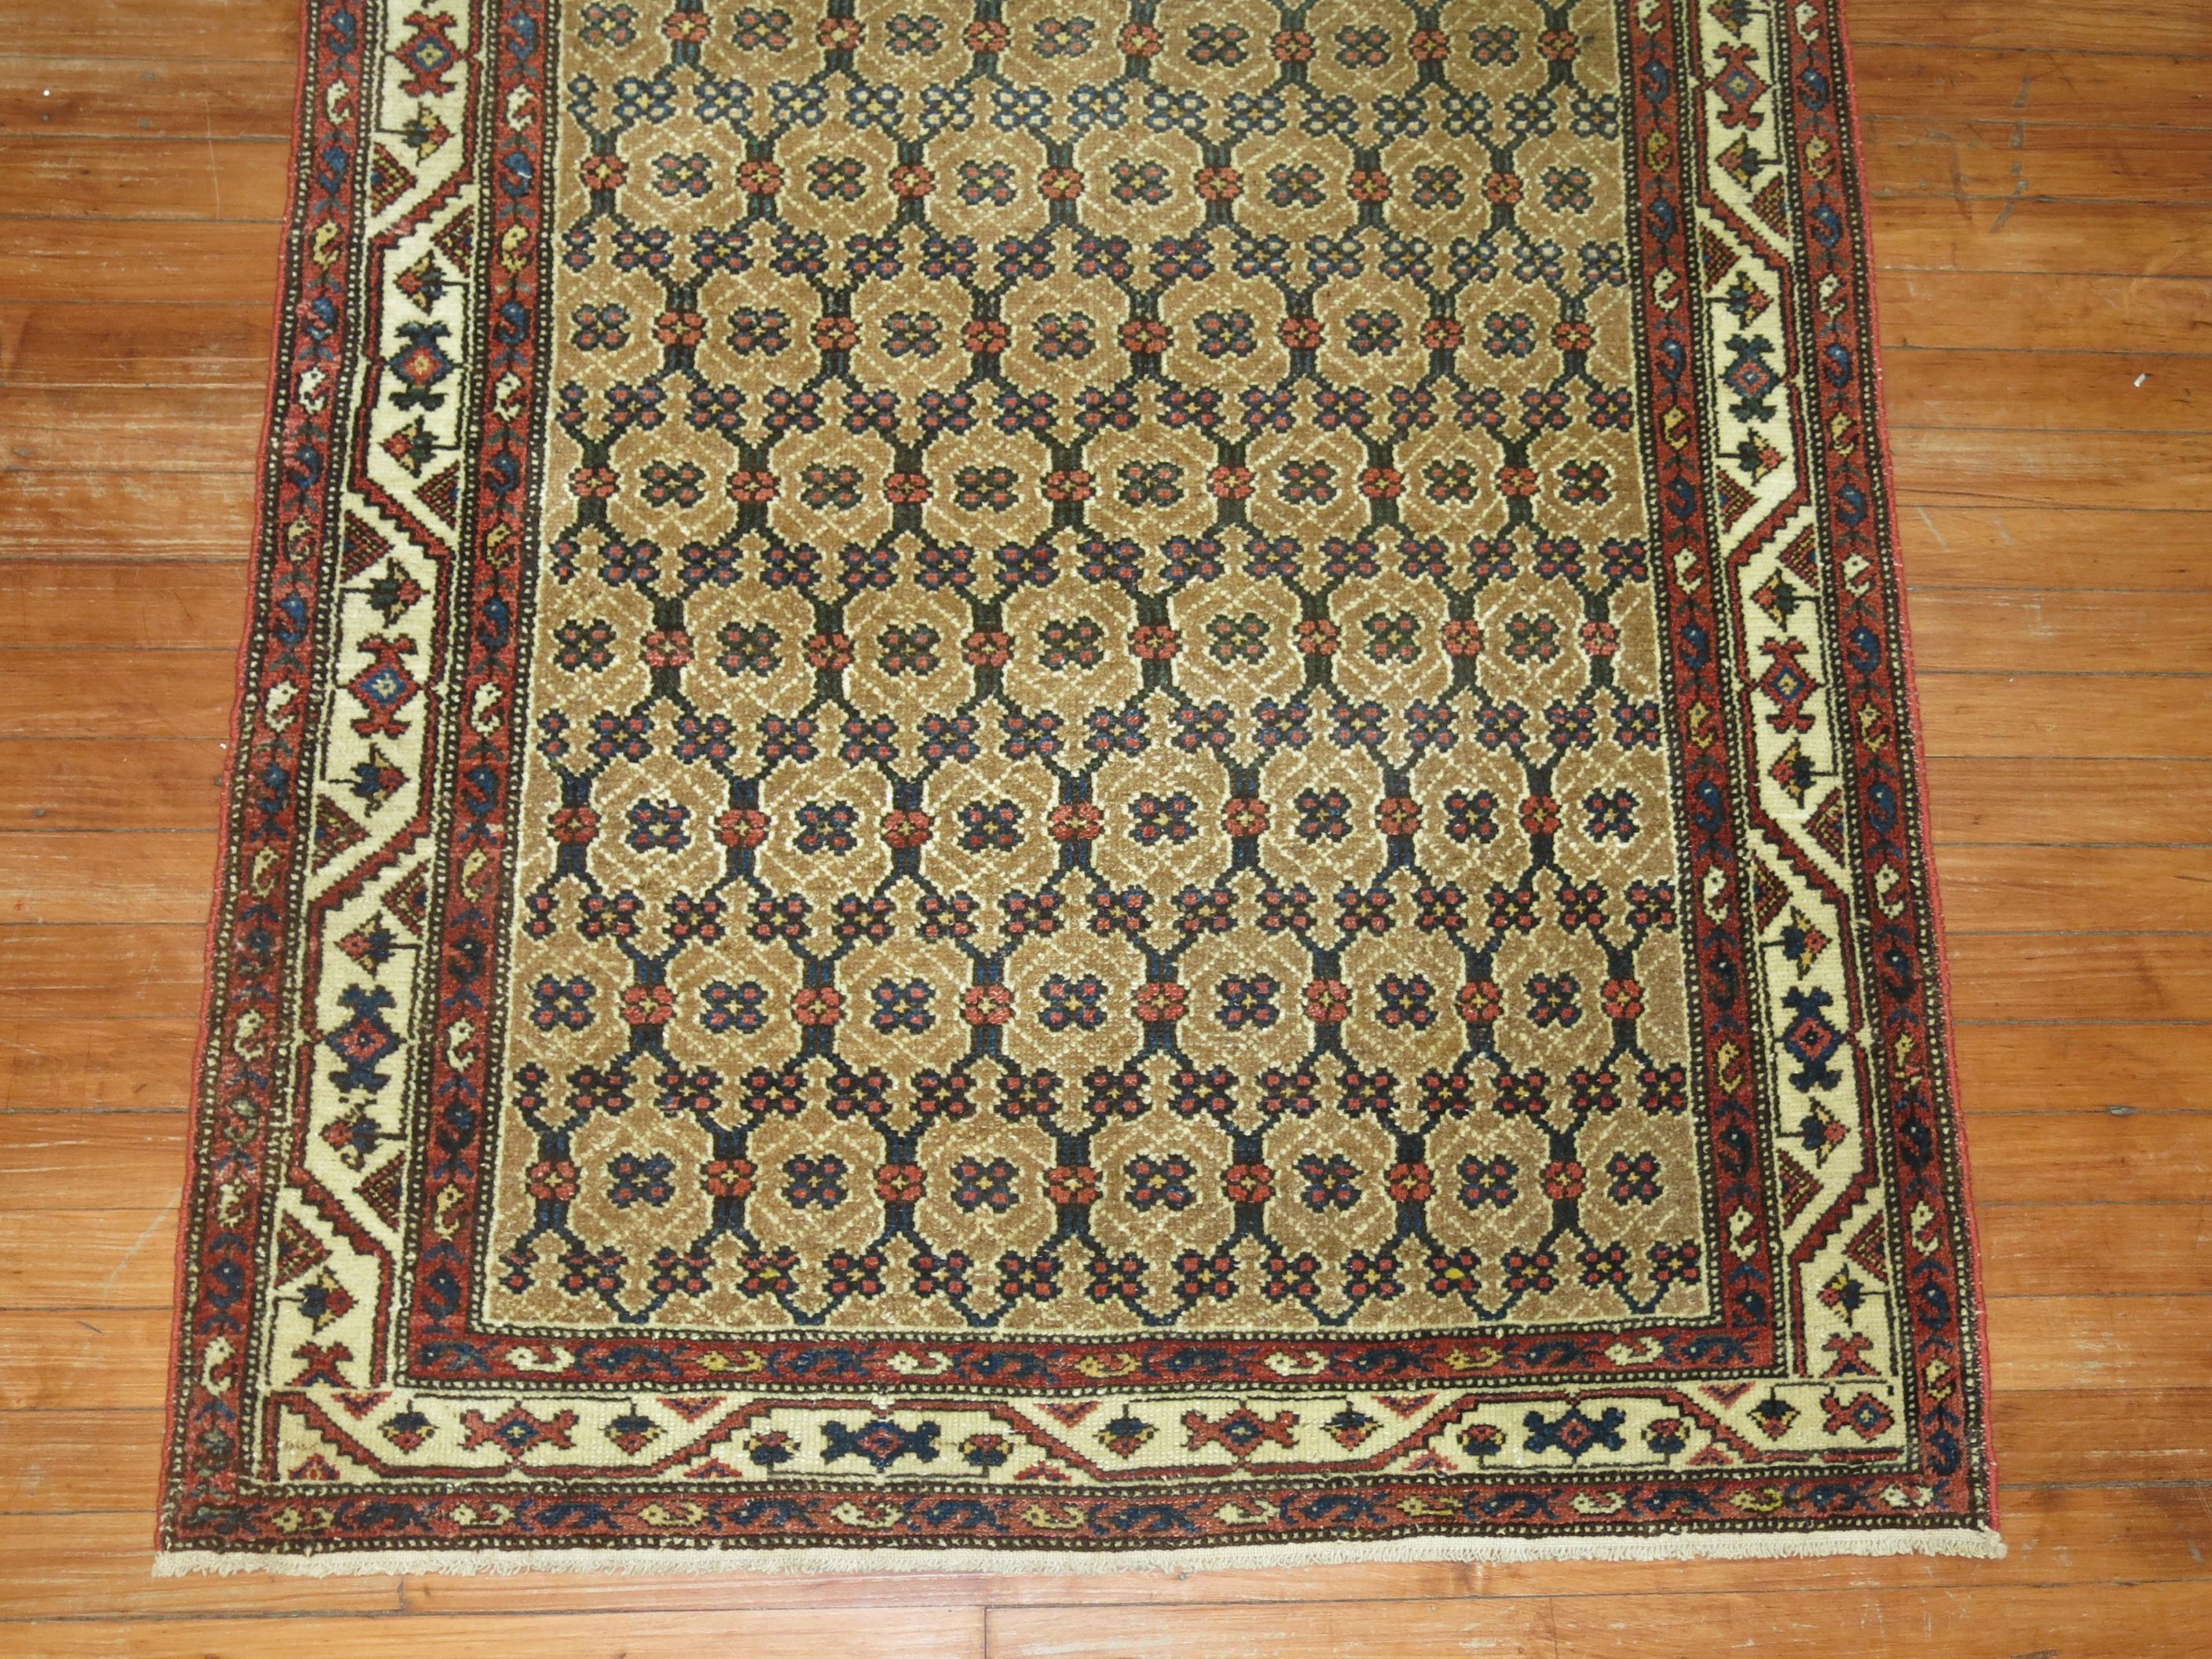 Hand-Knotted Tribal Camel Color Antiqie Persian Runner